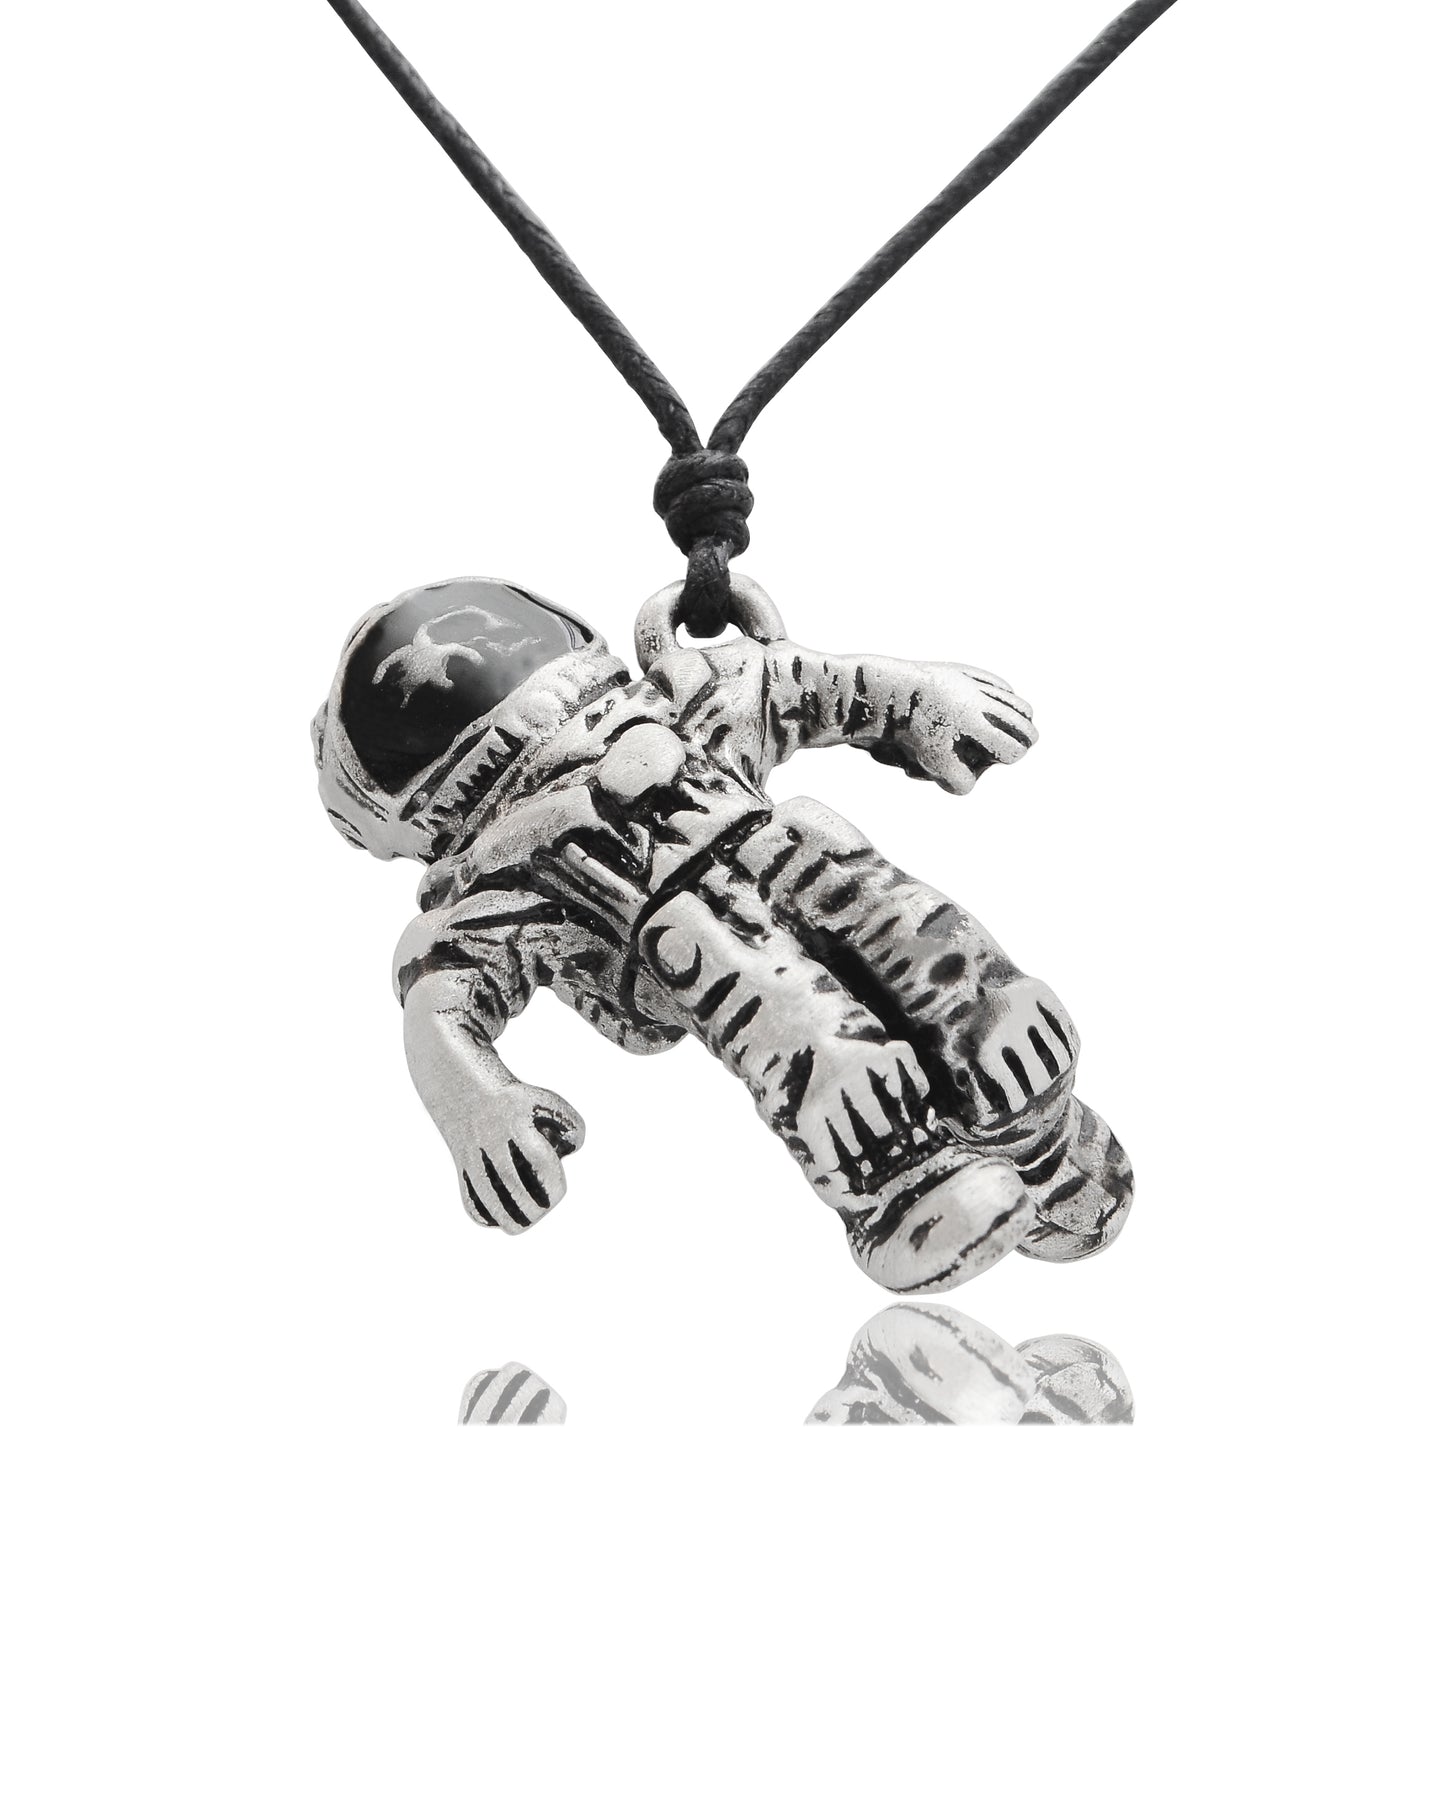 Astronaut Space Man Silver Pewter Charm Necklace Pendant Jewelry With Cotton Cord